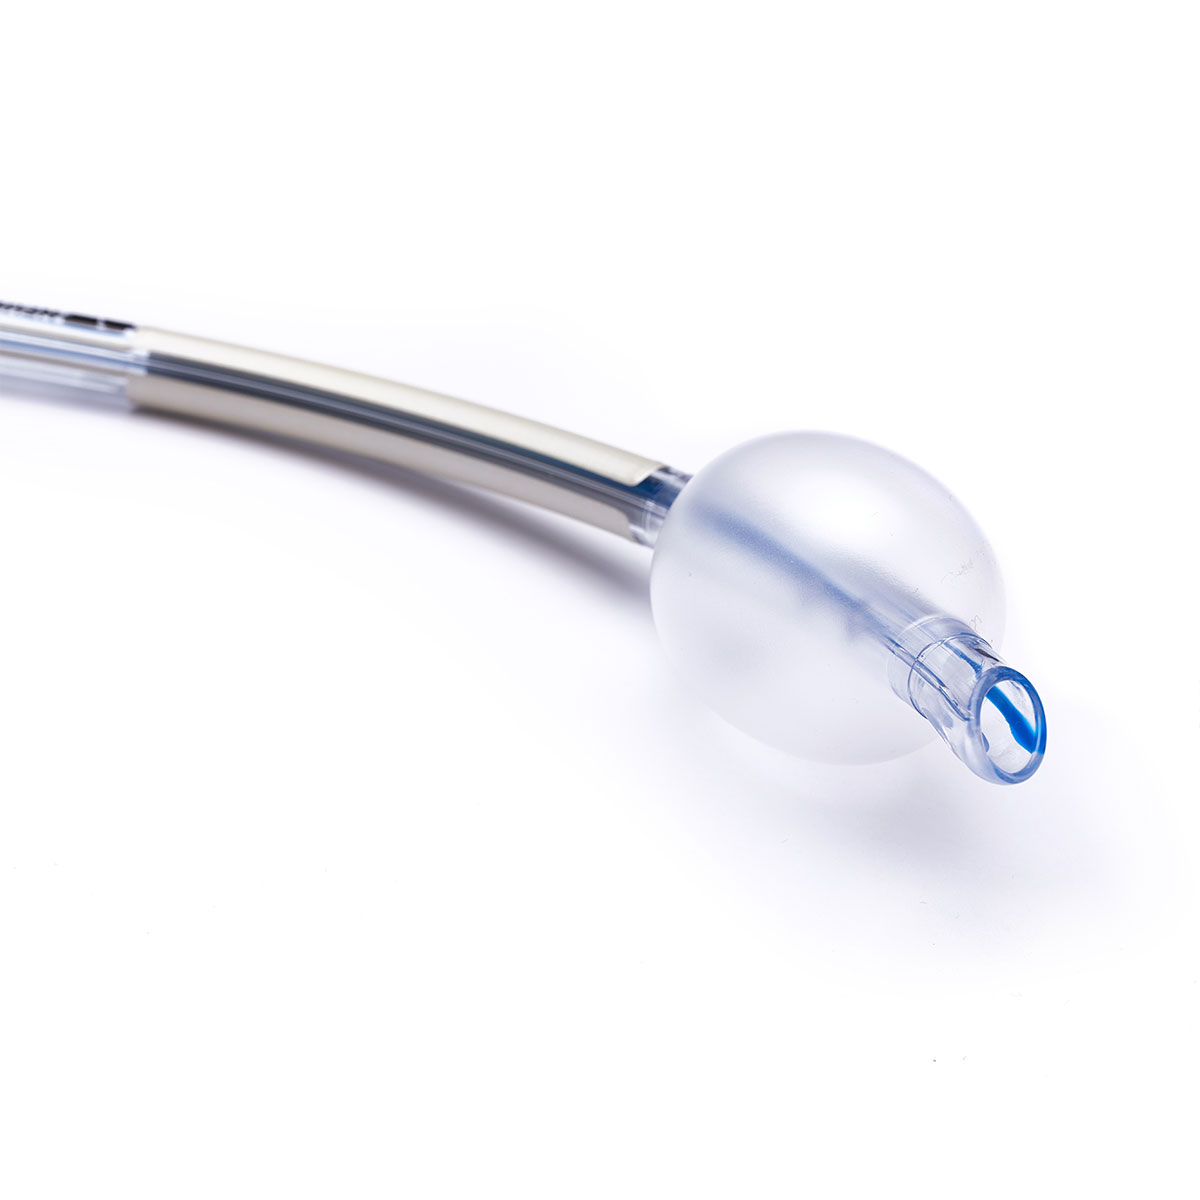 Cobra EMG ET Tube - Universal Recurrent Laryngeal Nerve Monitoring - Size 7 mm - cuff- Intraoperative Neuromonitoring Product